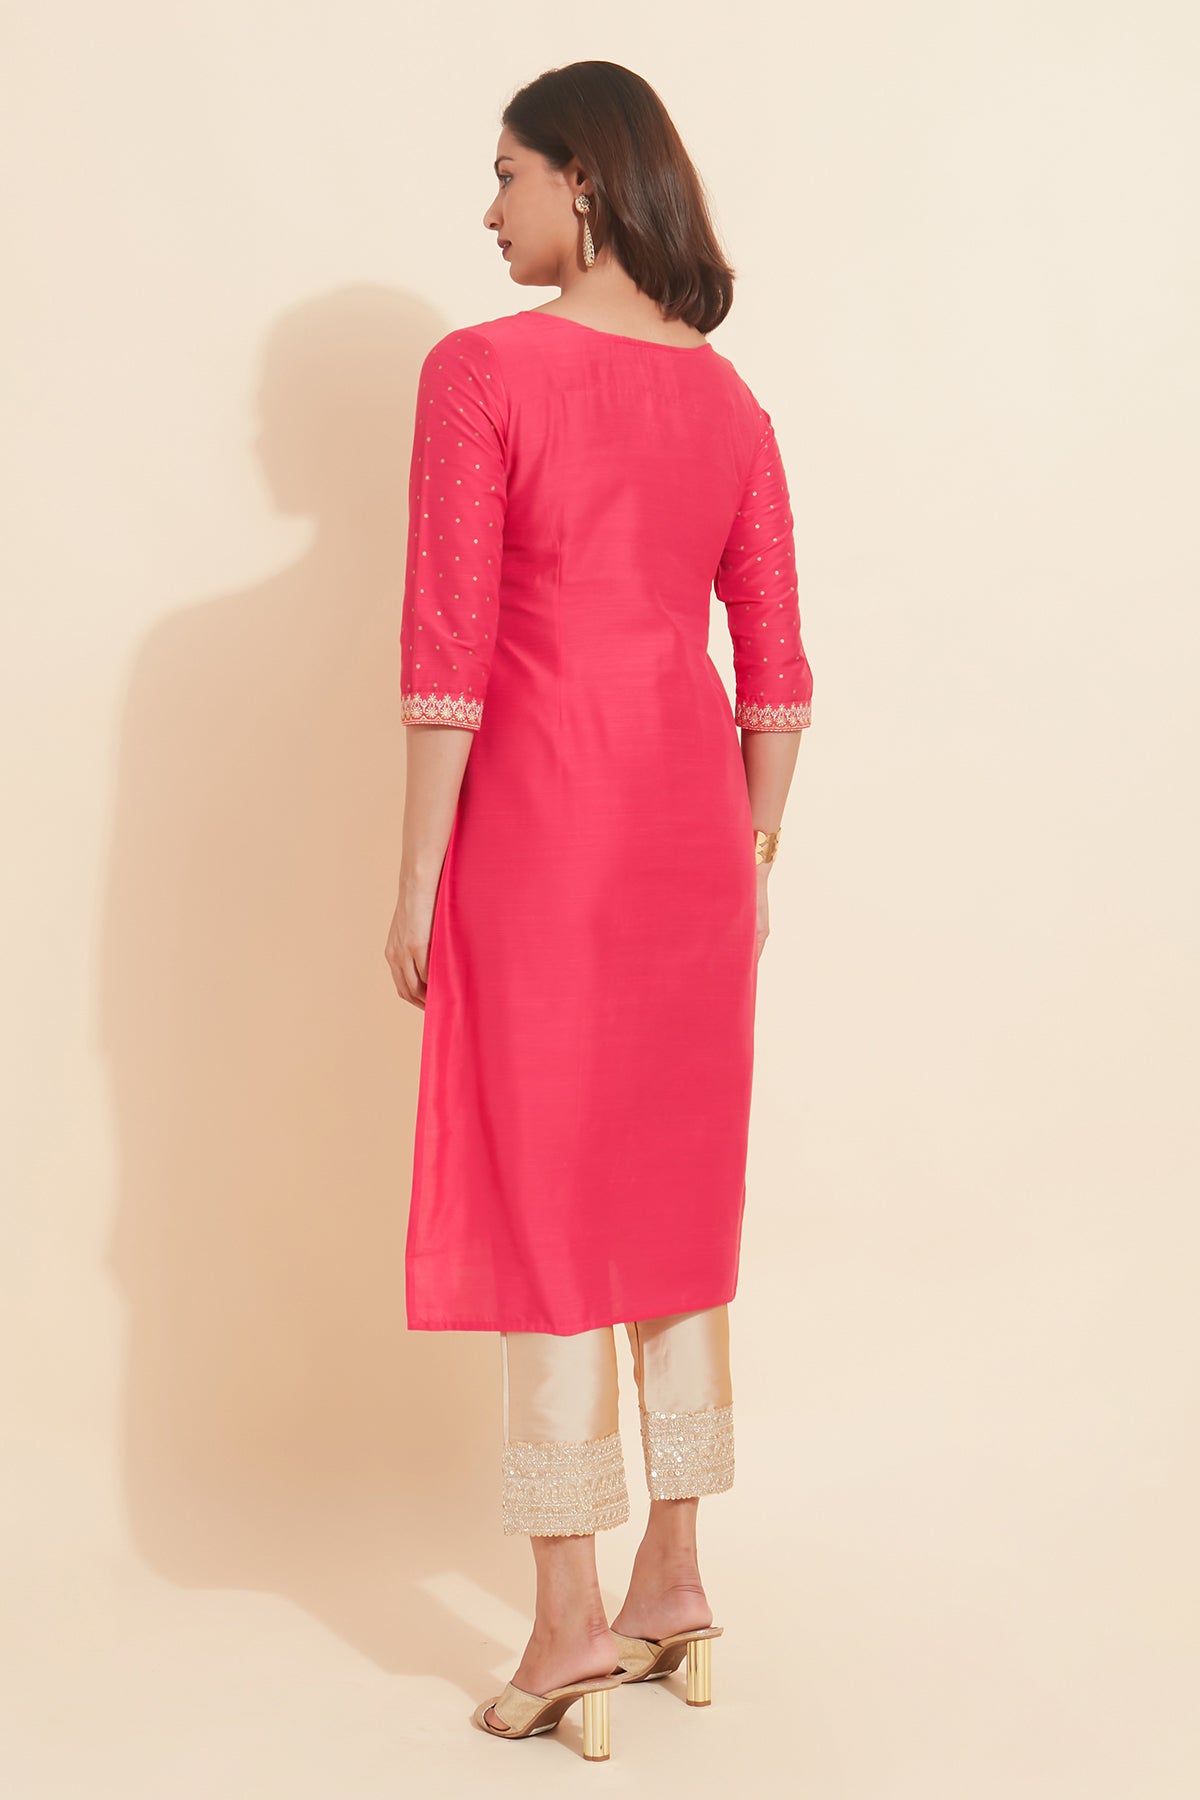 Jewel Embroidered Neckline With Floral Placement Kurta - Pink